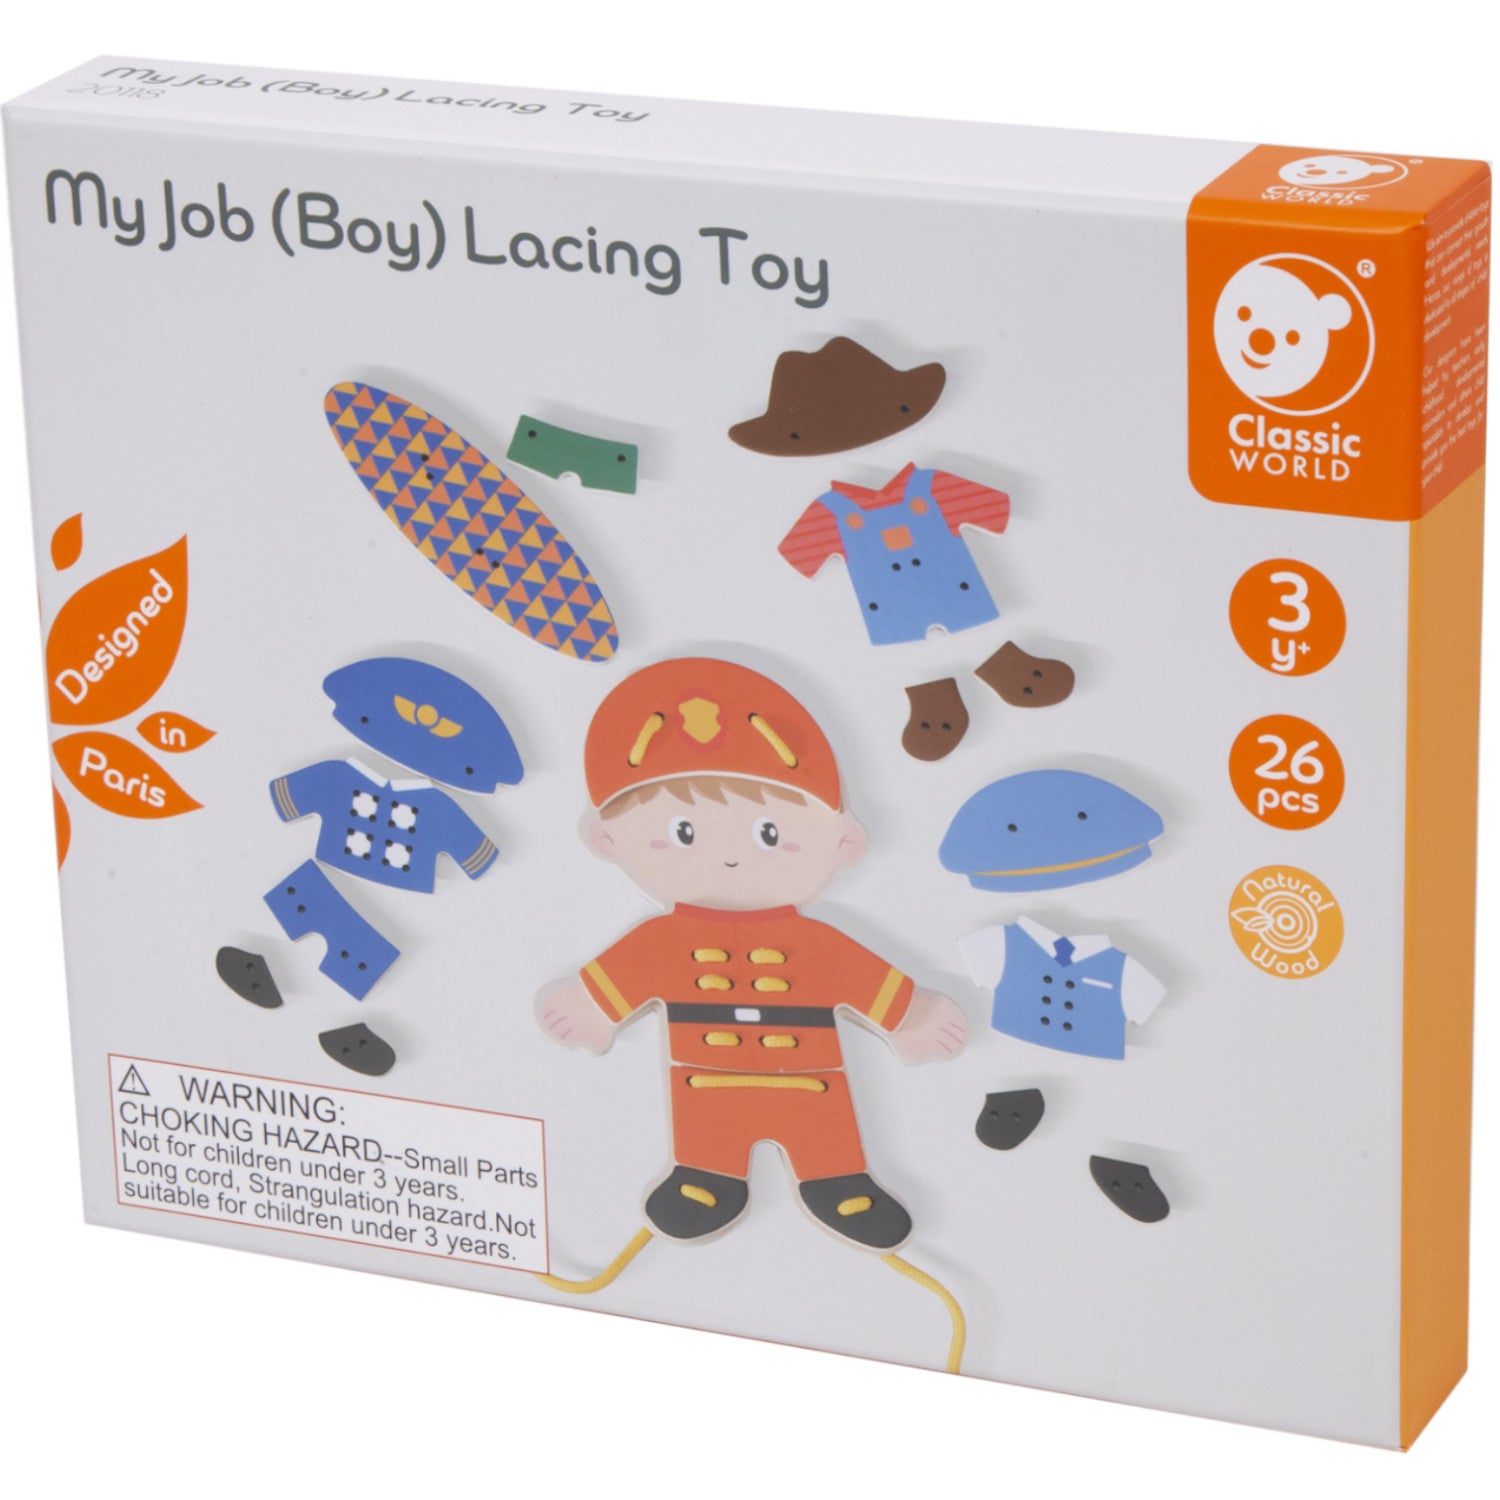 Classic World Lacing Toy Wooden Boy 26pc